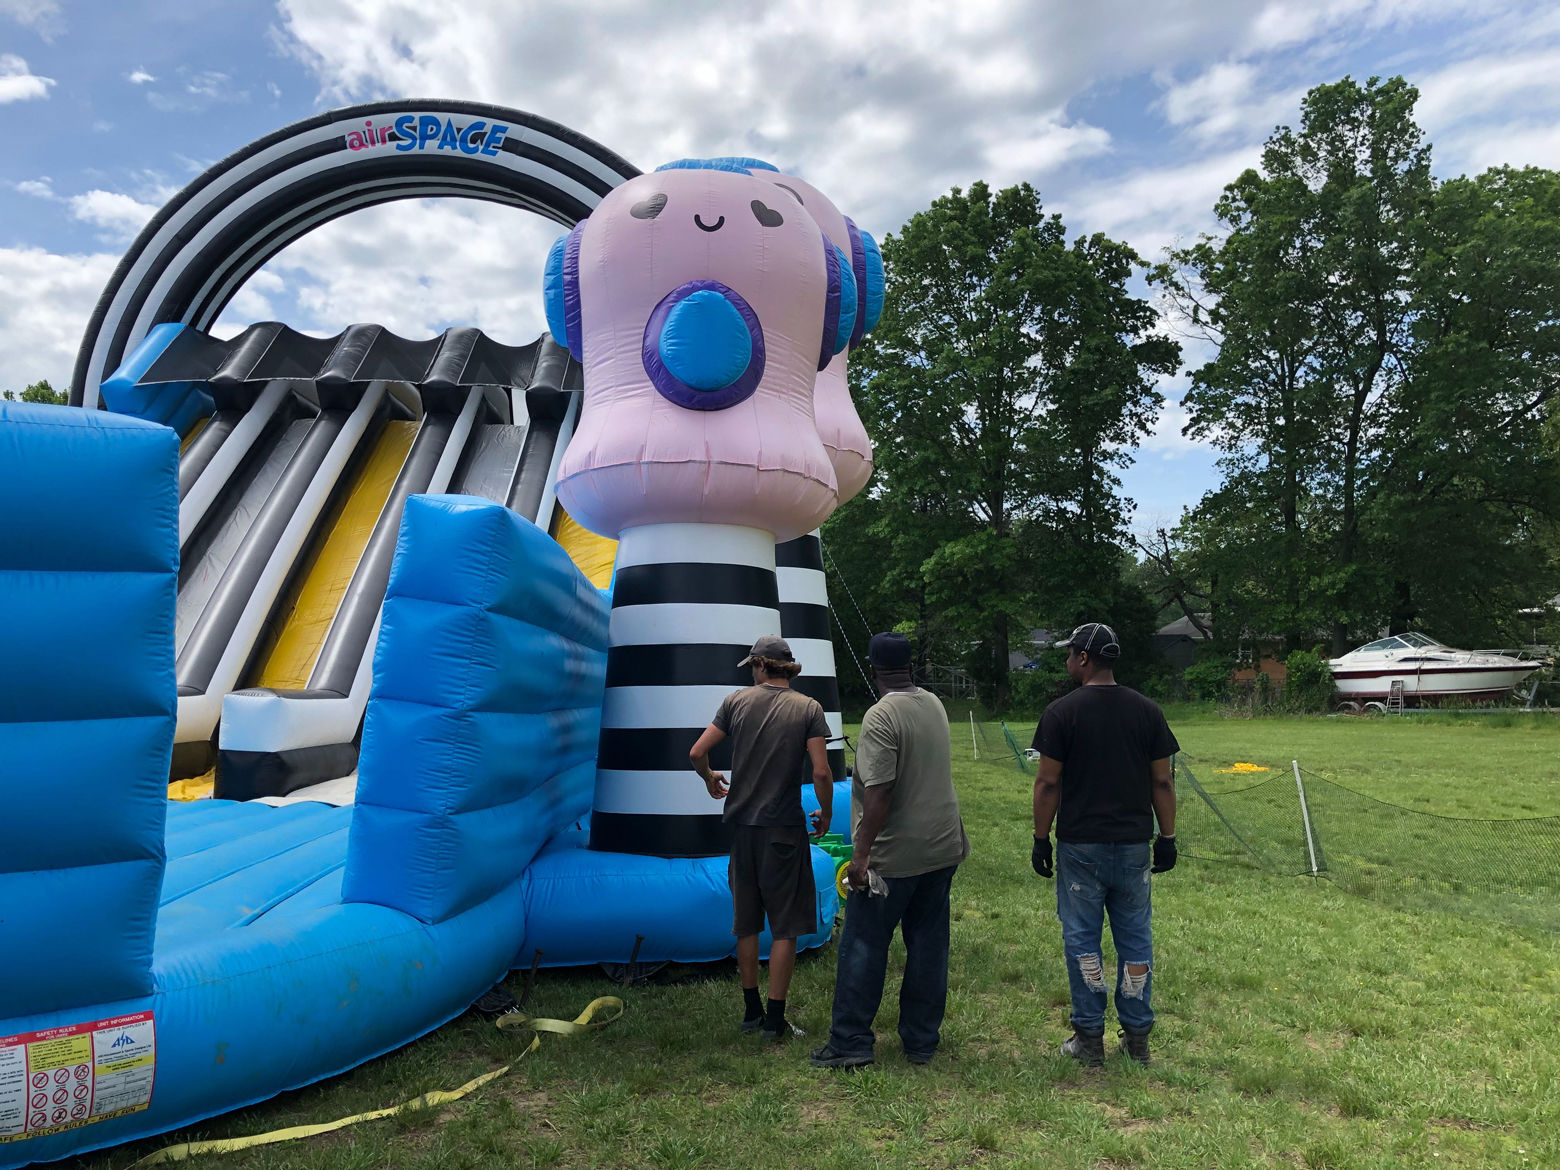 Those who decide to buy a ticket and explore the complex of bouncy experiences will have a lot to choose from, including these slides. (WTOP/Kristi King)